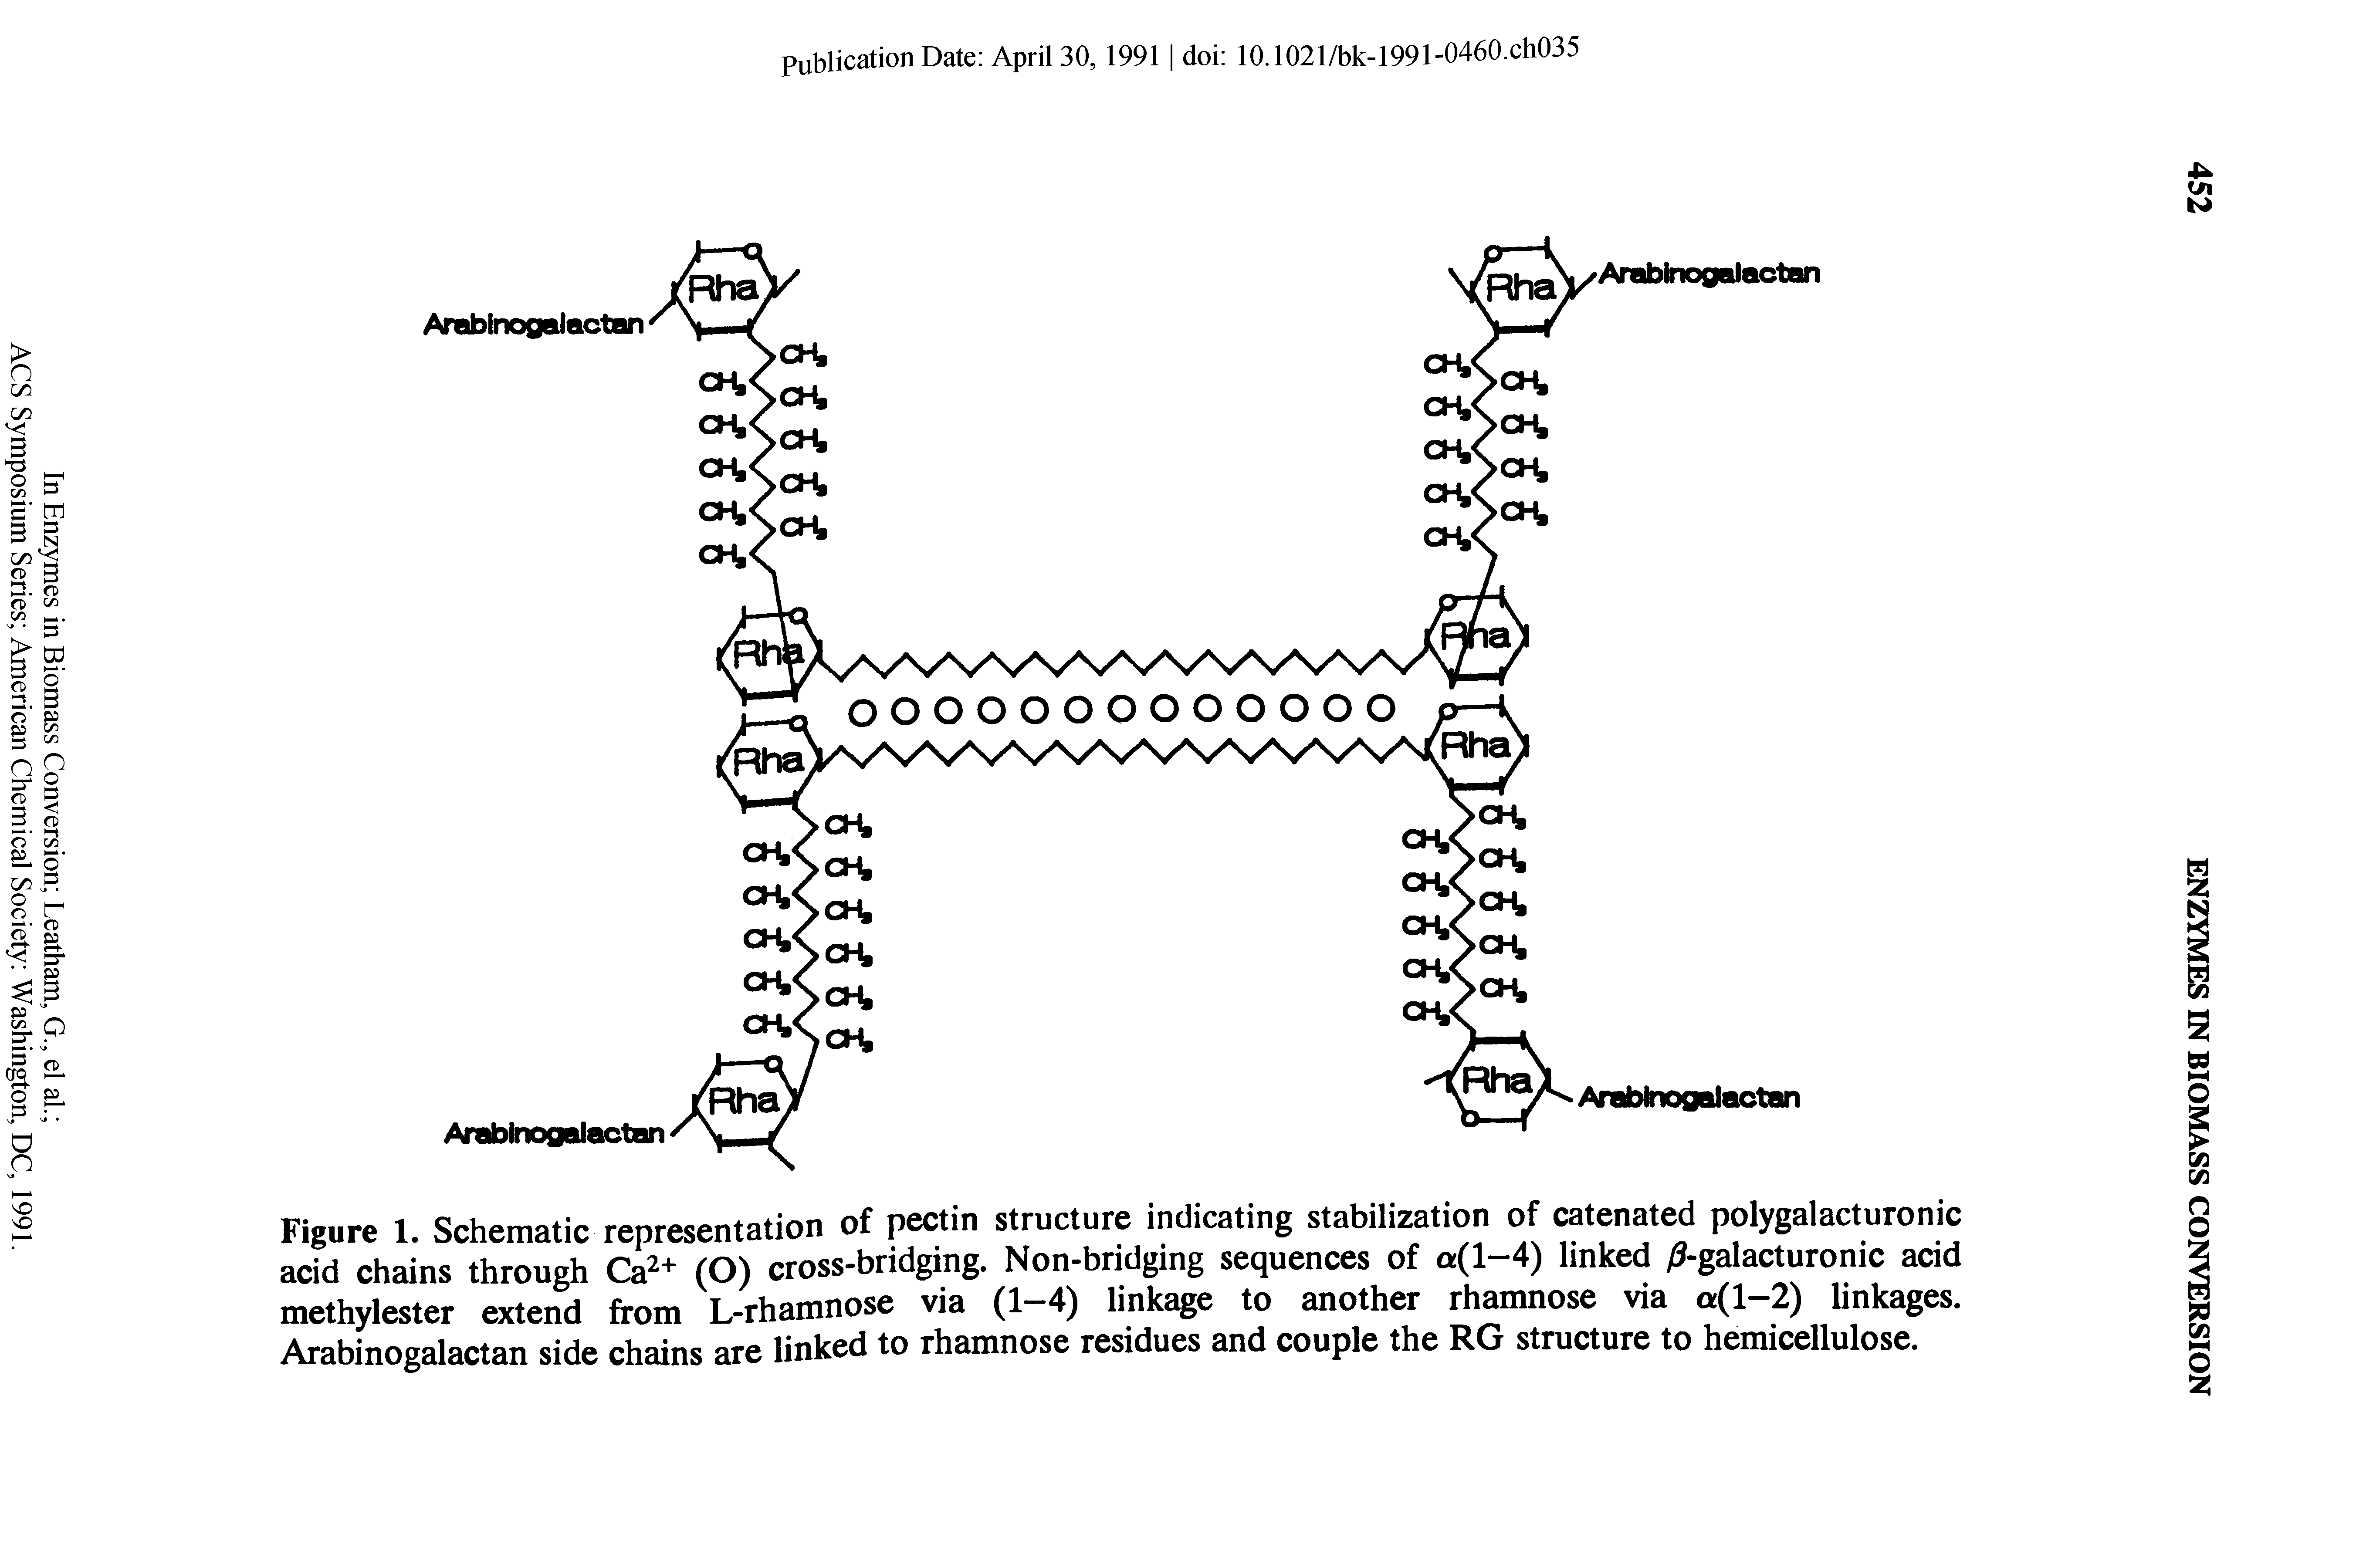 Figure 1. Schematic representation of pectin structure indicating stabilization of catenated polygalacturonic acid chains through Ca + (O) cross-bridging. Non-bridging sequences of a(l-4) linked /S-galacturonic acid methylester extend from L-rhamnose via (1-4) linkage to another rhamnose via a(l-2) linkages. Arabinogalactan side chains are linked to rhamnose residues and couple the RG structure to hemicellulose.